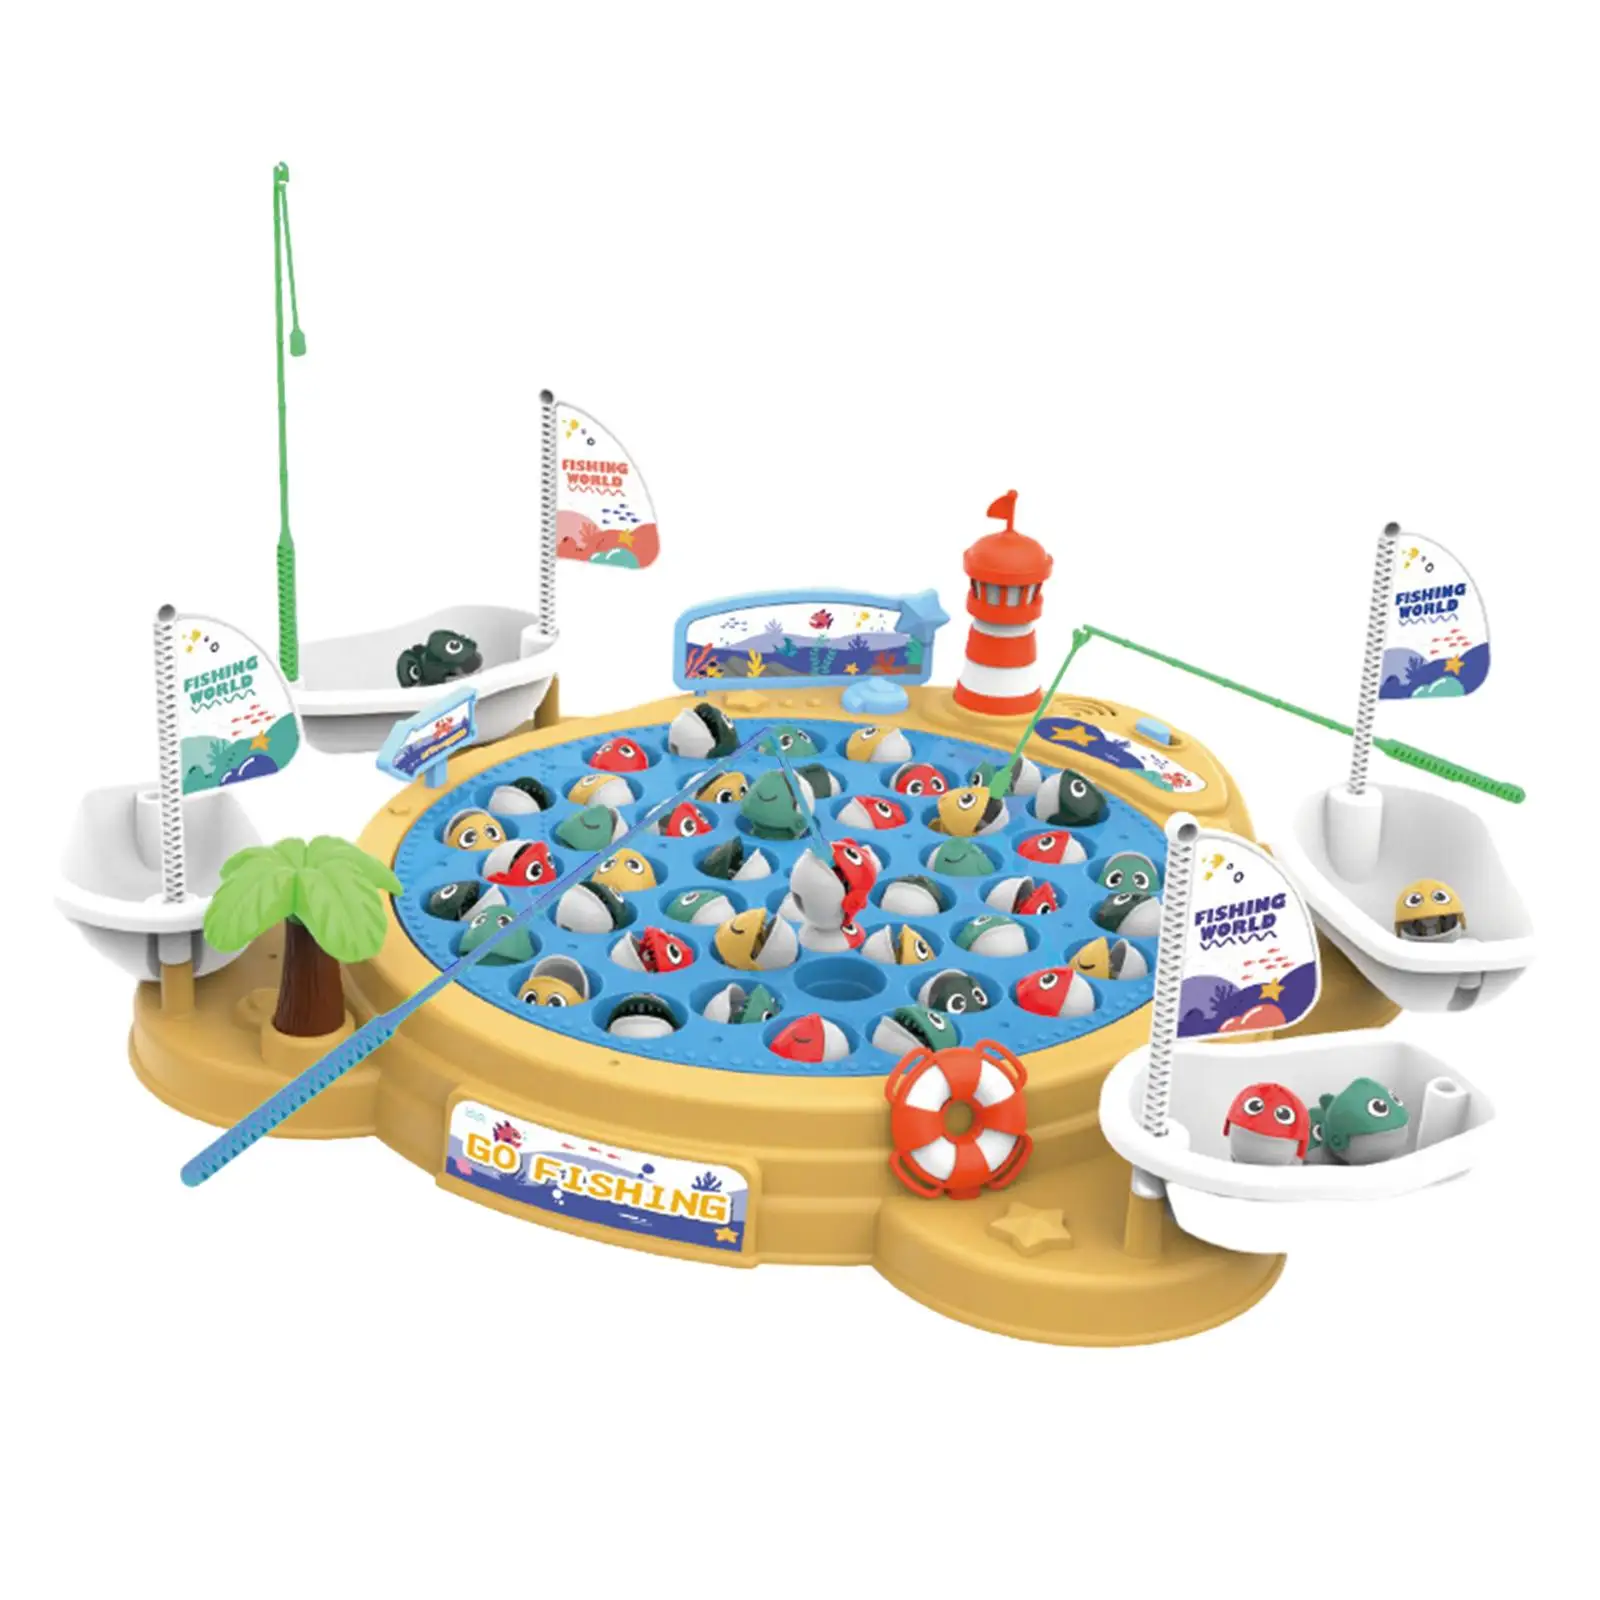 Fishing Game Play Set Novelty Preschool Learning Educational Toy Fishing Game Toy for Girls Children Toddlers Holiday Gifts